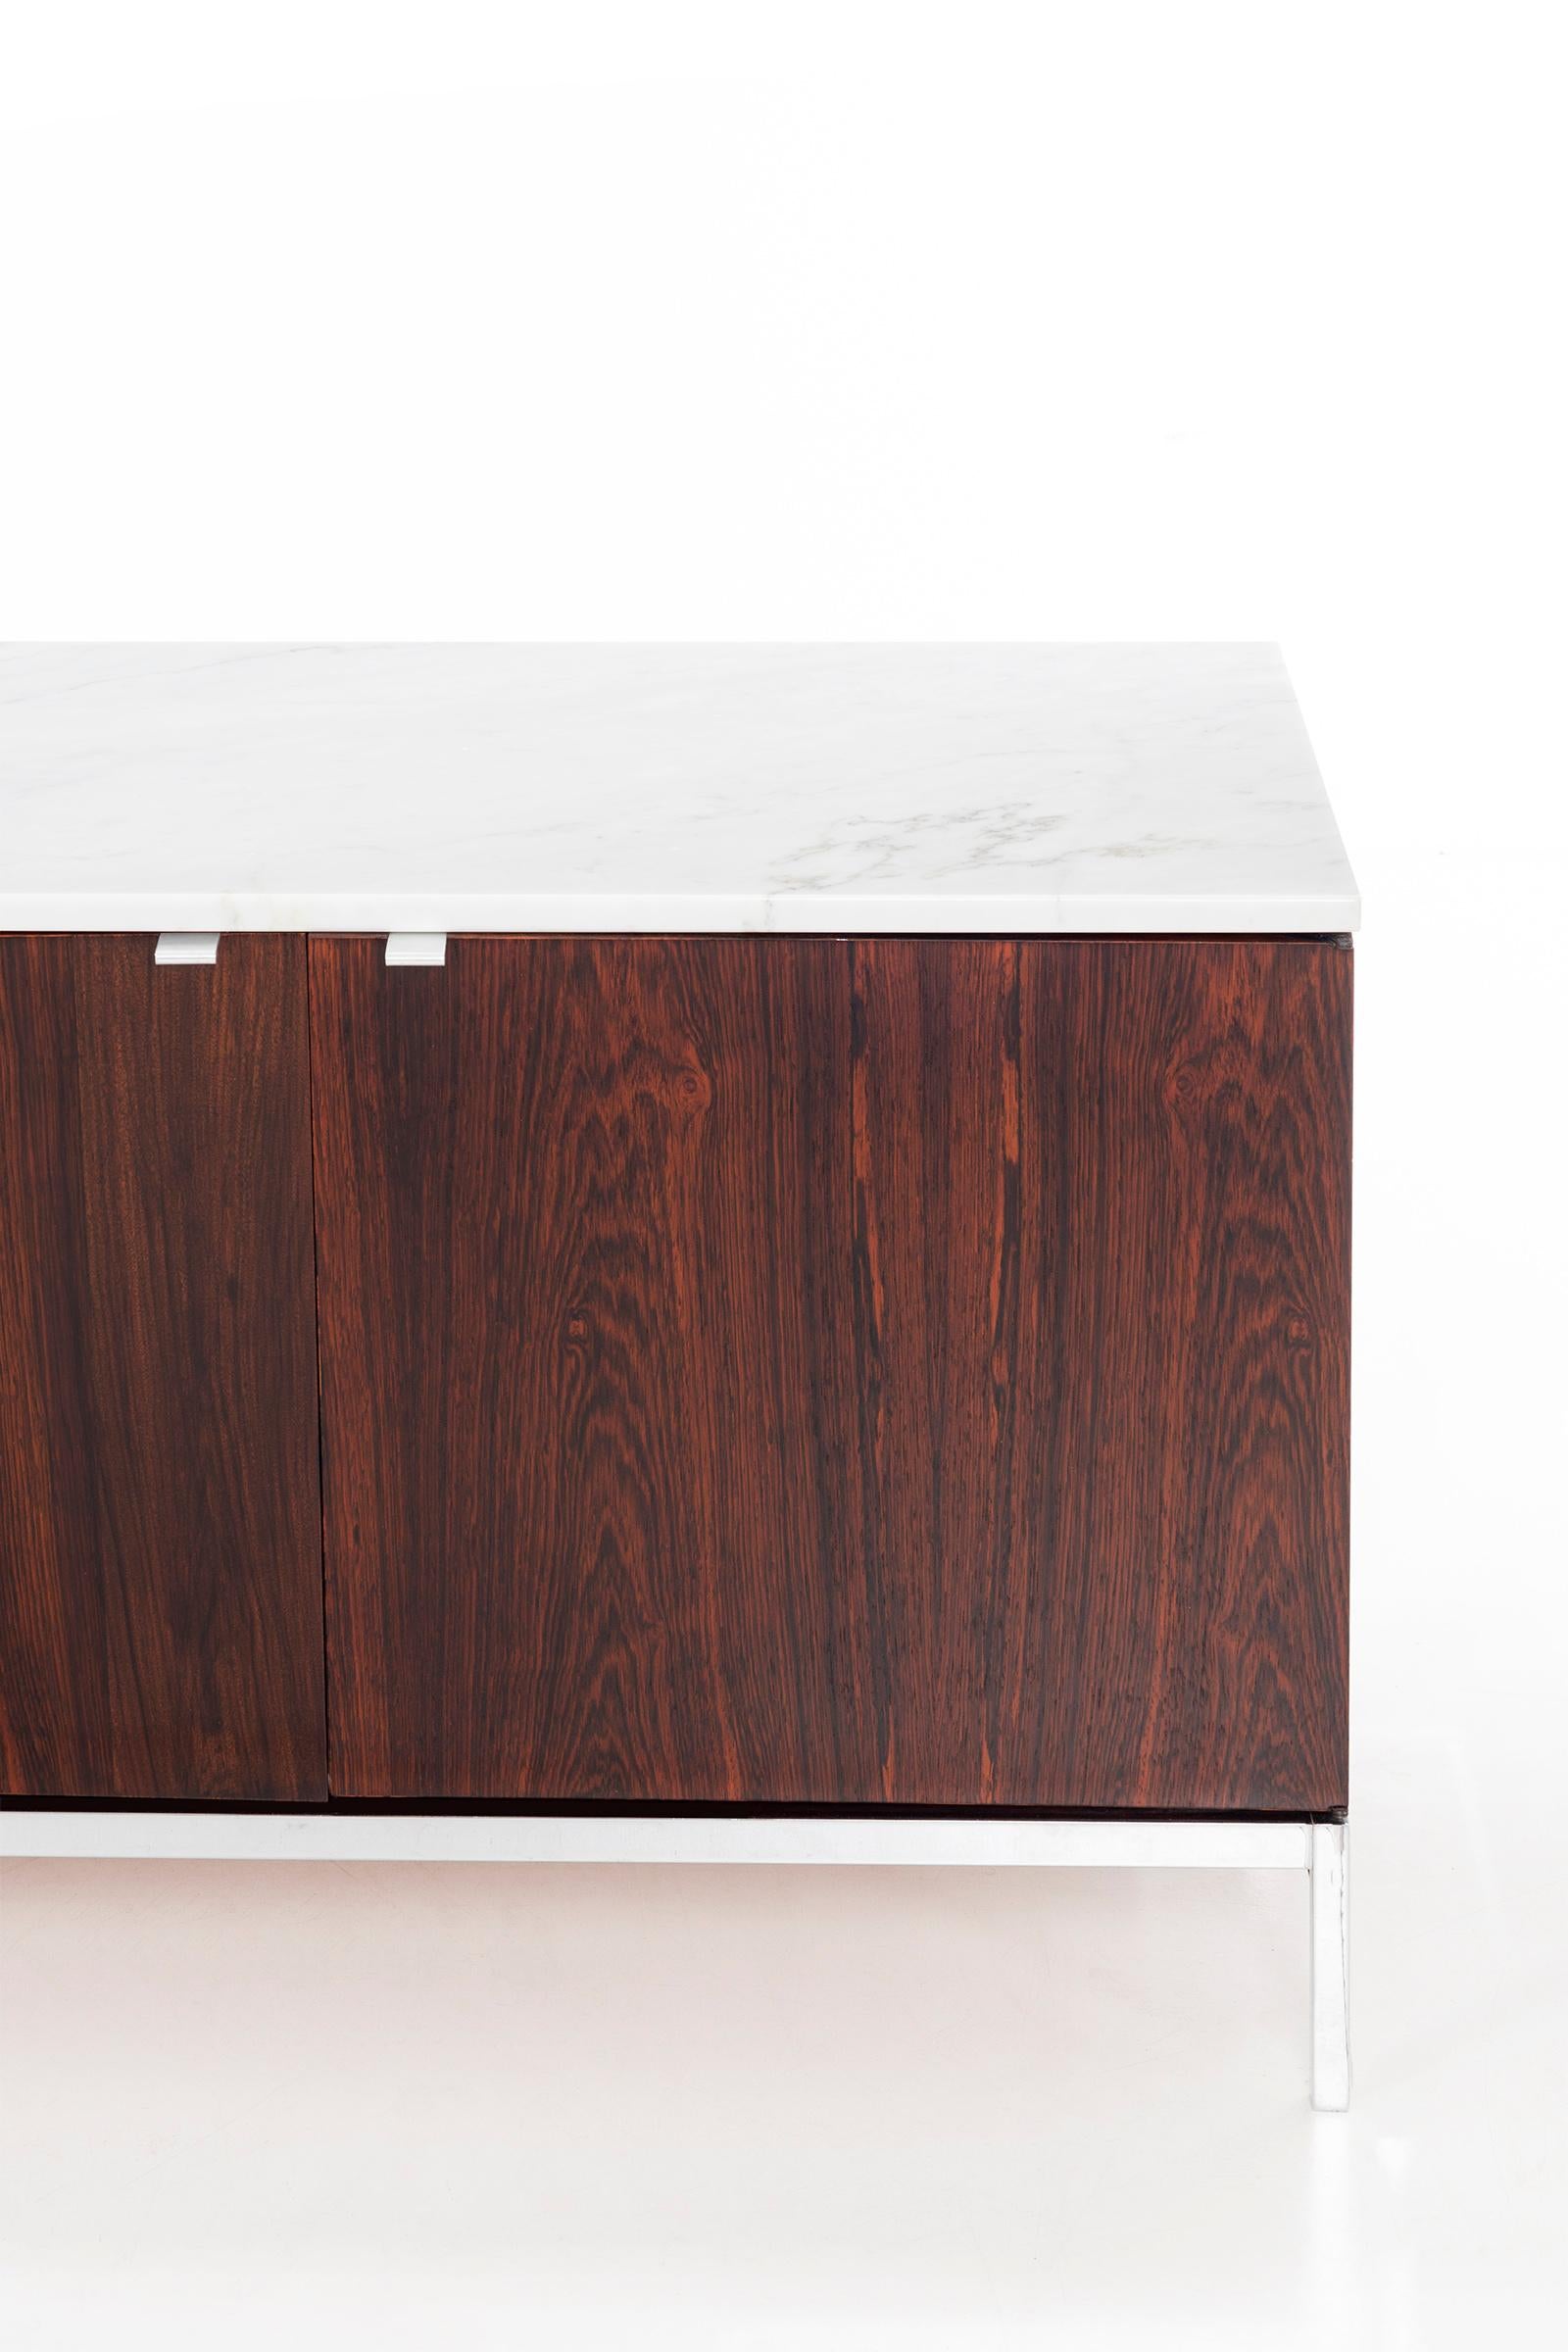 Monumental Custom Florence Knoll Rosewood Credenza 1